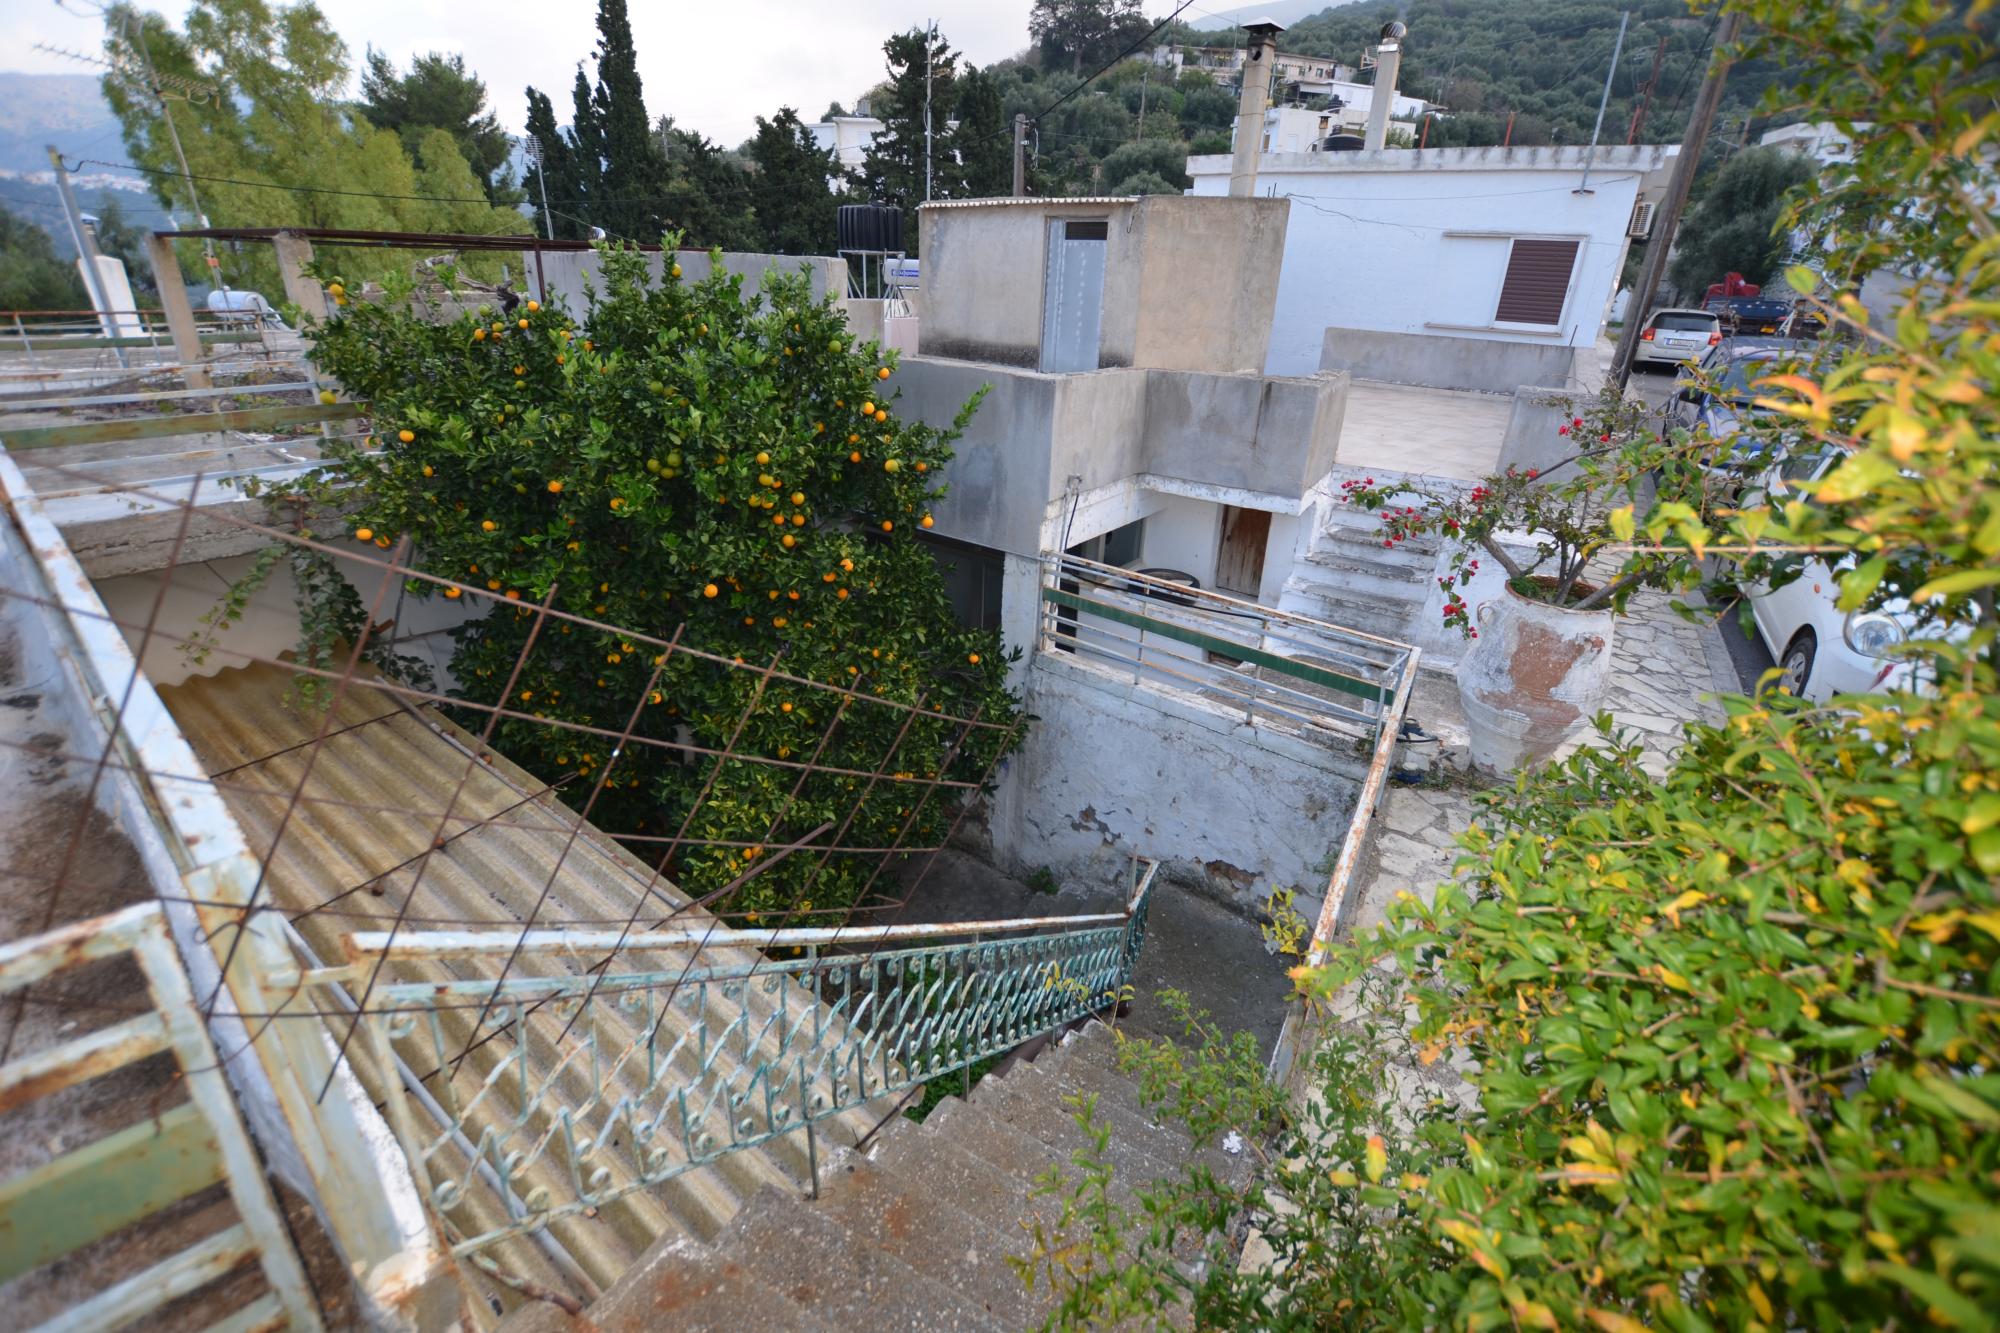 Large house for renovation in the center of village with outside spaces and roof terrace.